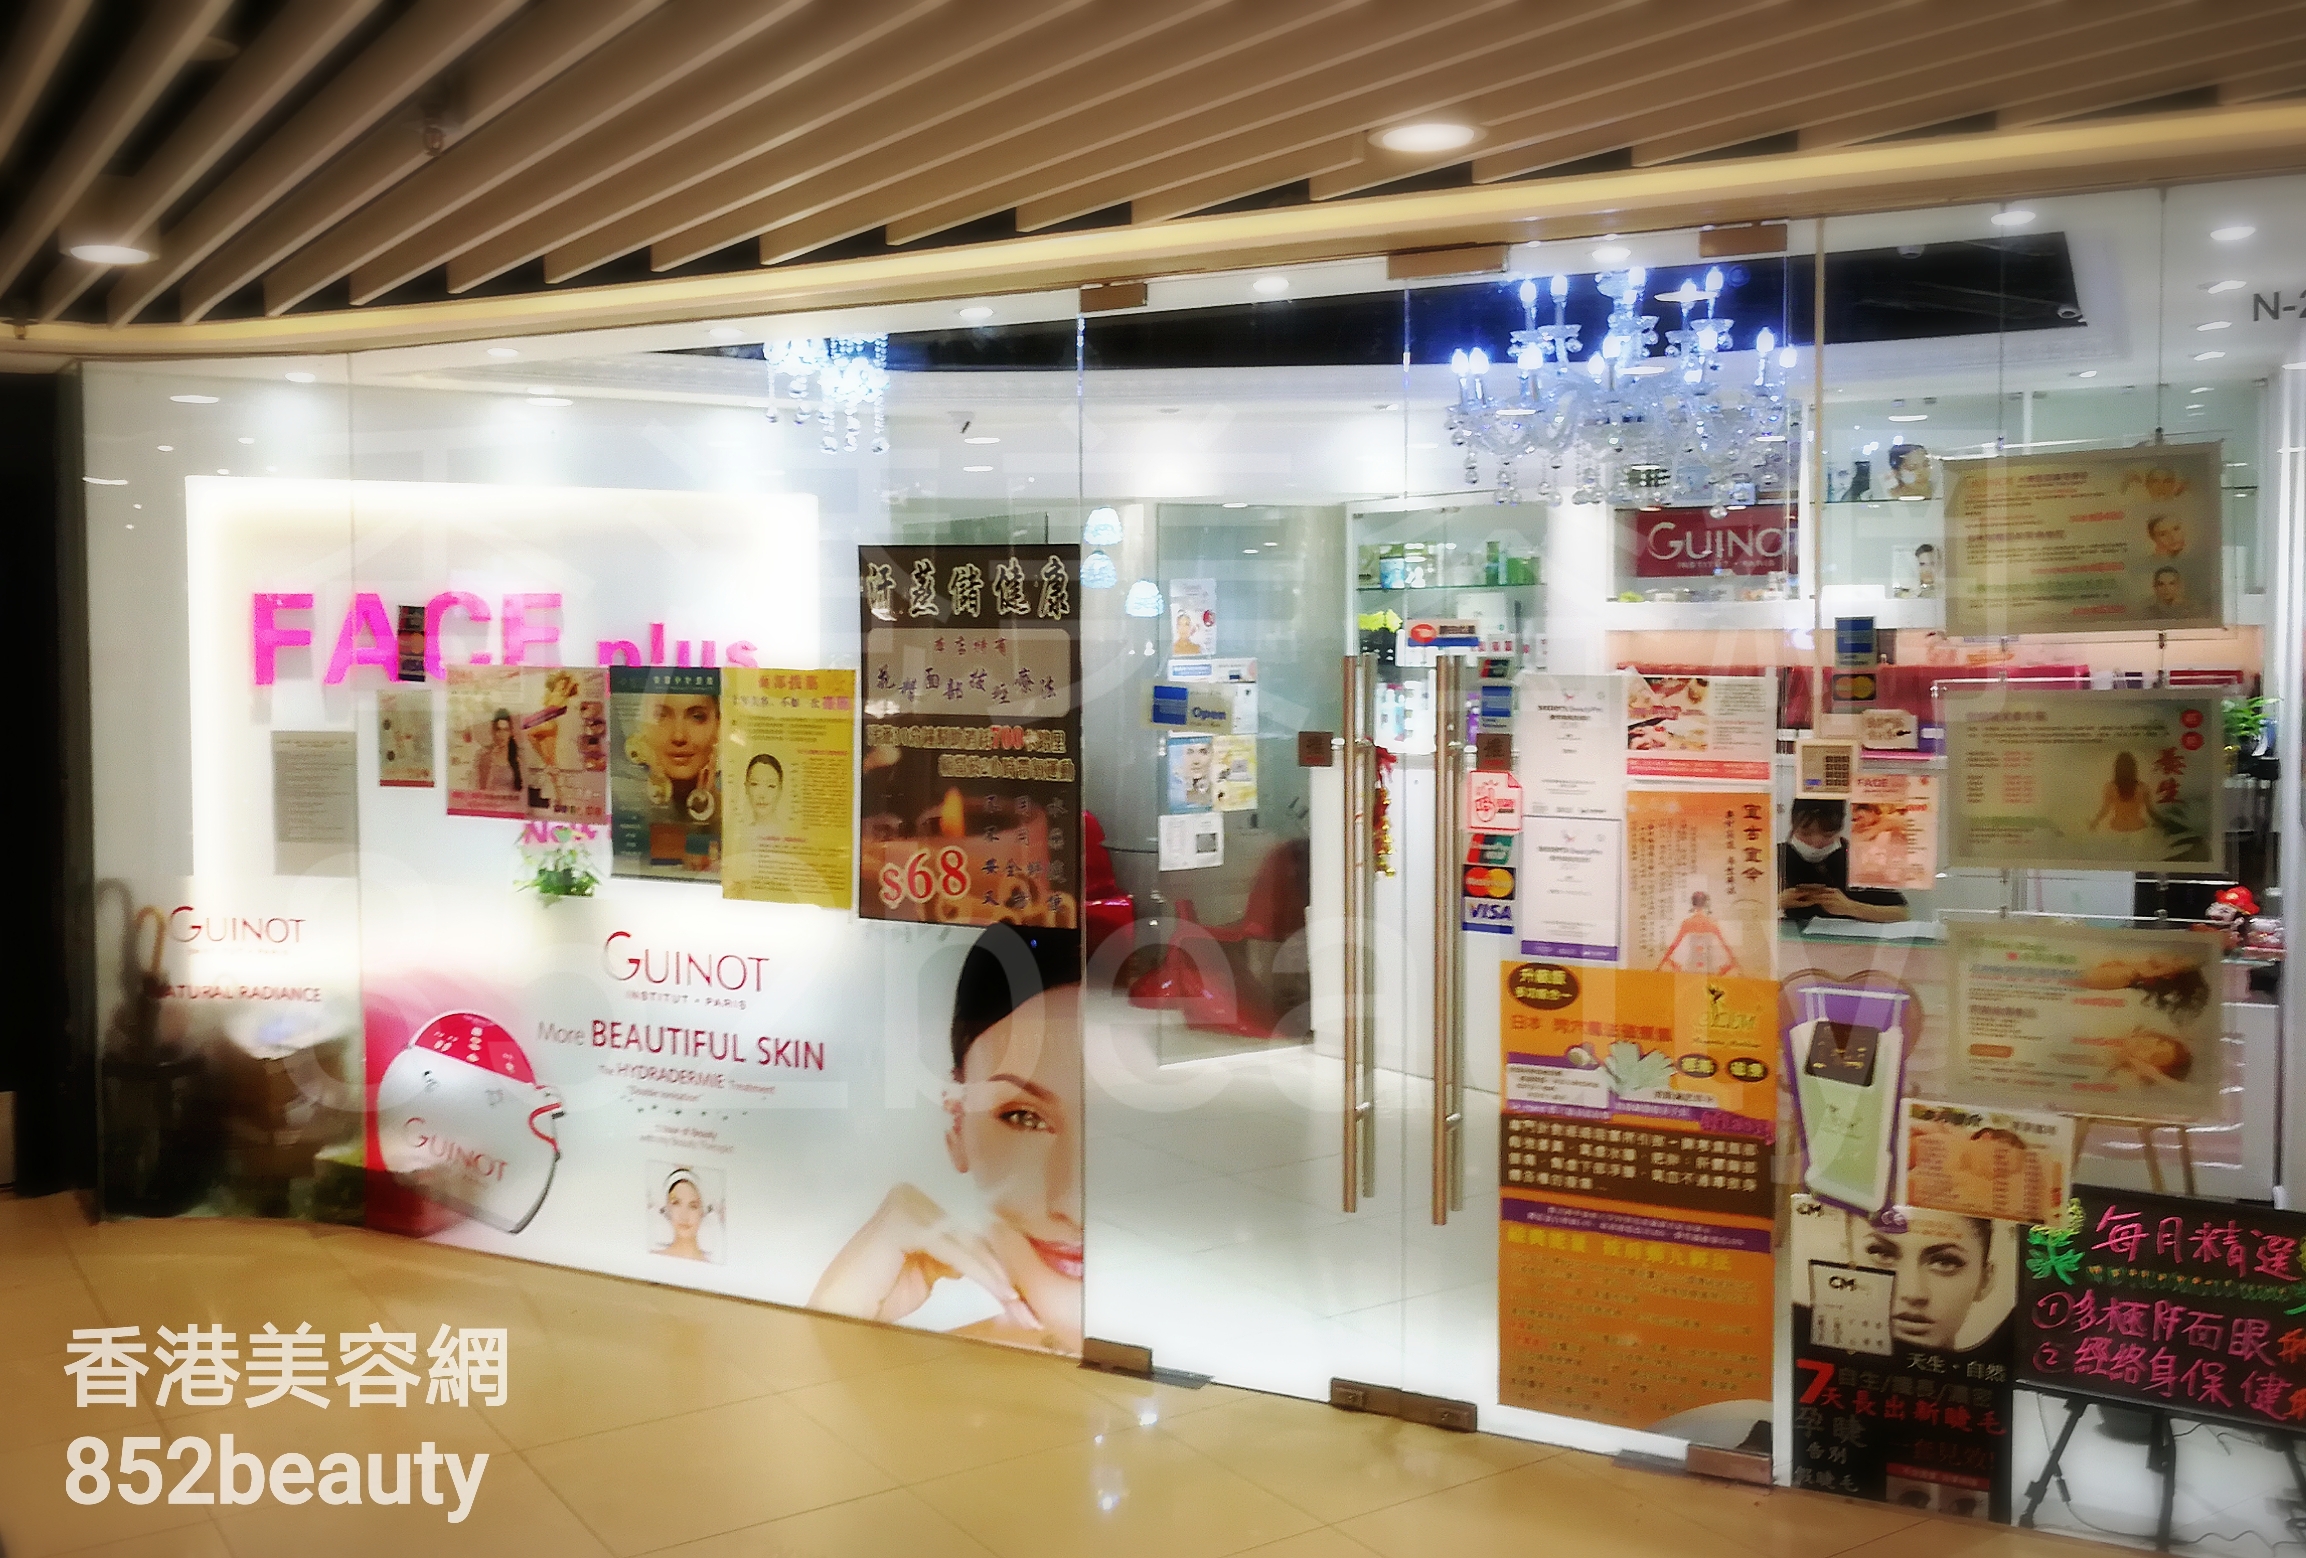 Men Grooming: FACE plus Beauty Centre 面蓉坊